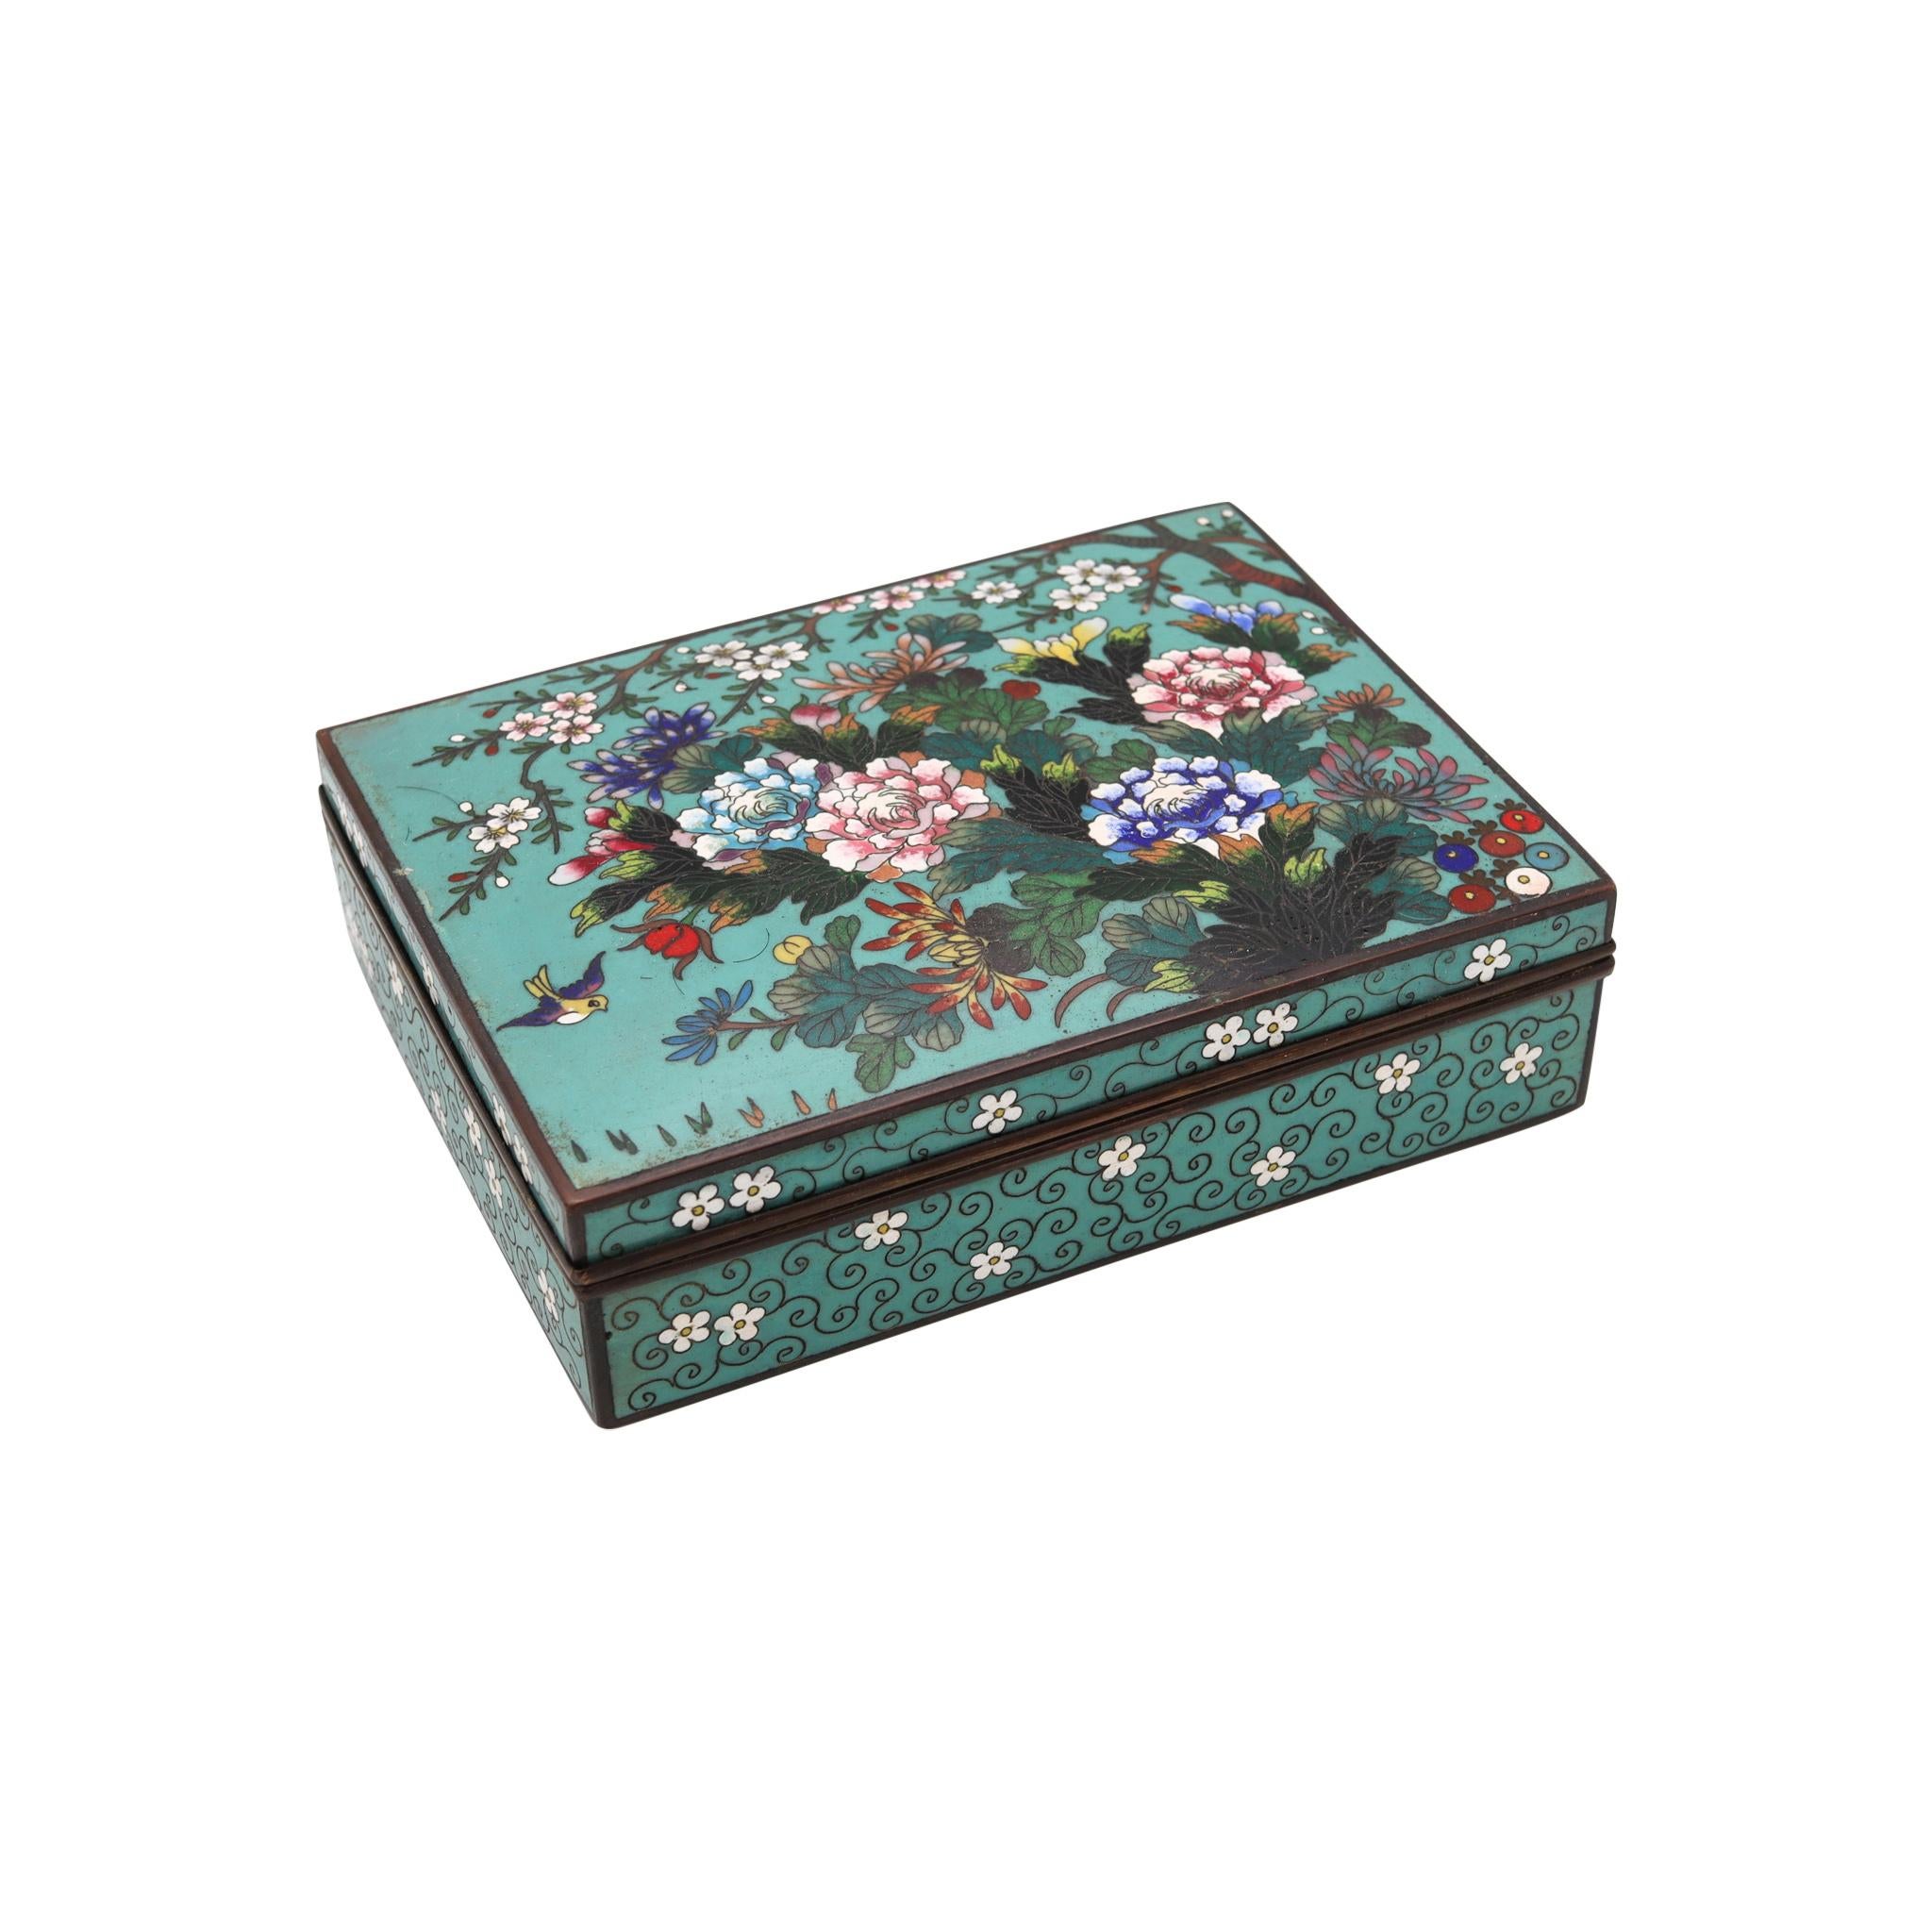 Japanese box from the Meiji Period (1868-1912).

Beautiful antique rectangular colorful box, created in Japan during the Meiji period (1868-1912), circa 1890's. It was carefully crafted in solid bronze with copper wires and embellished with